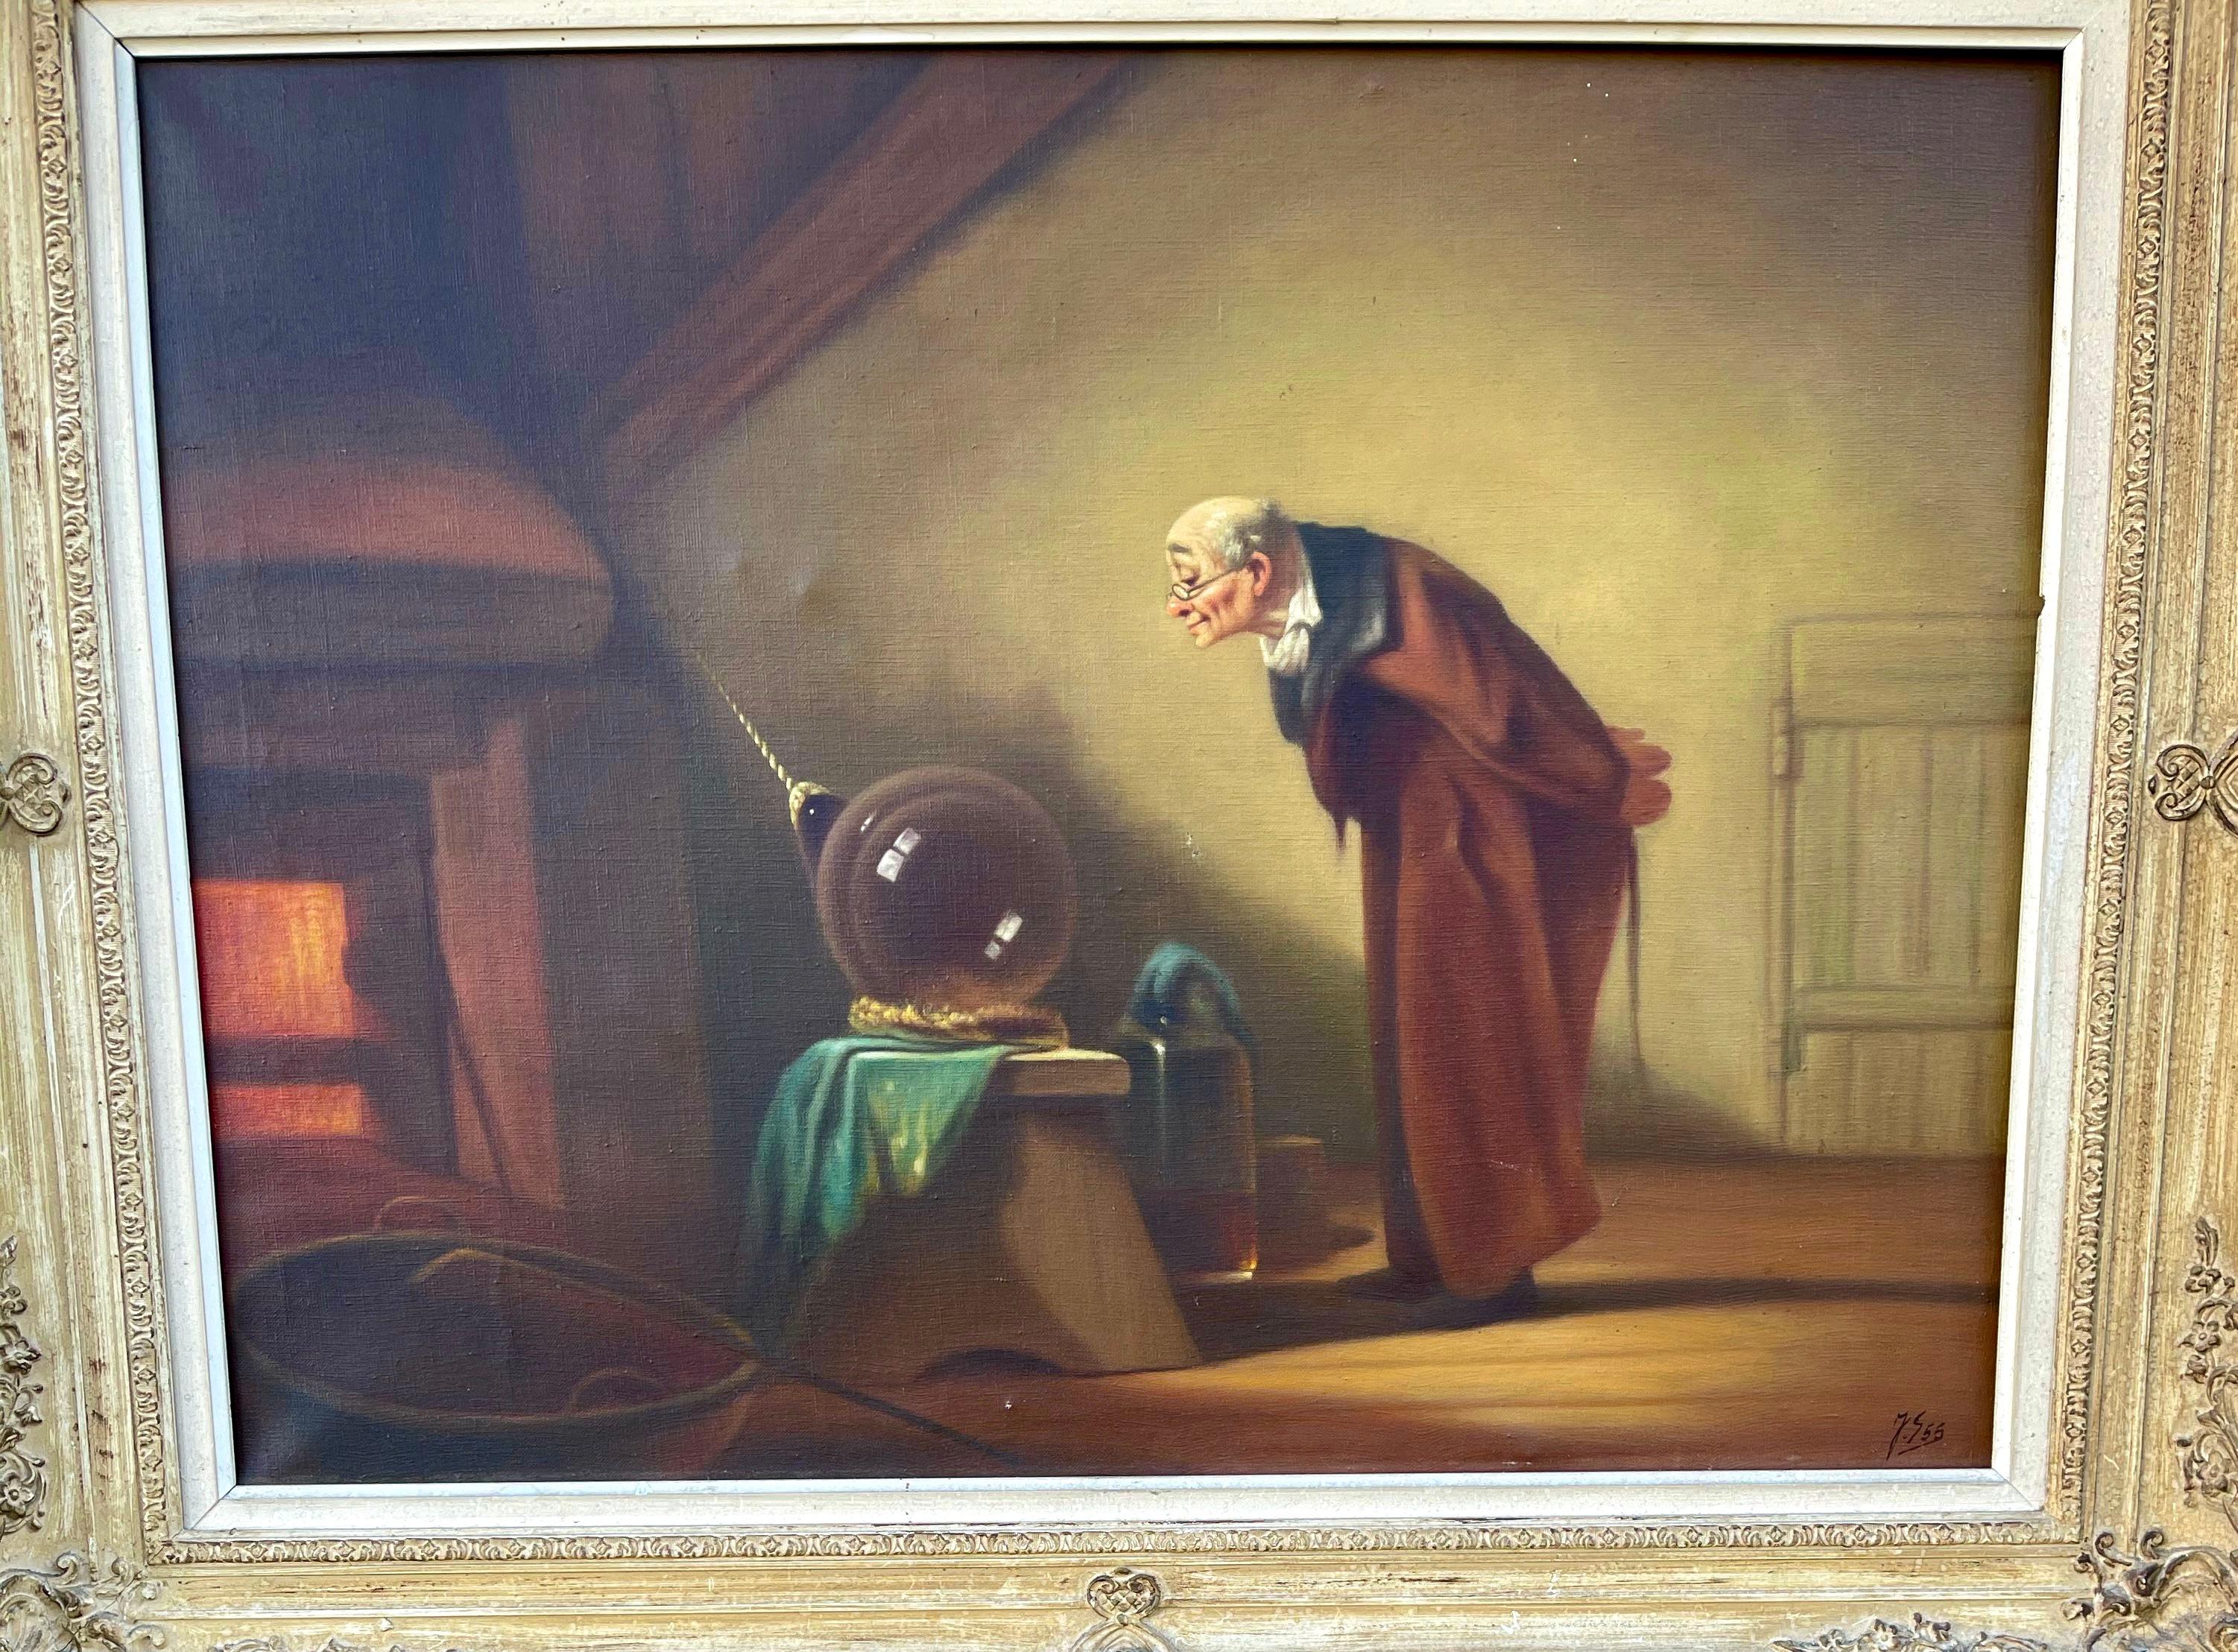 Large size and one of a kind, 1955 dated work of art, after world famous painter Carl Spitzweg.

This here large size and very well executed painting is another one of our recent great finds. Early 19th century, German-born artist Carl Spitzweg in